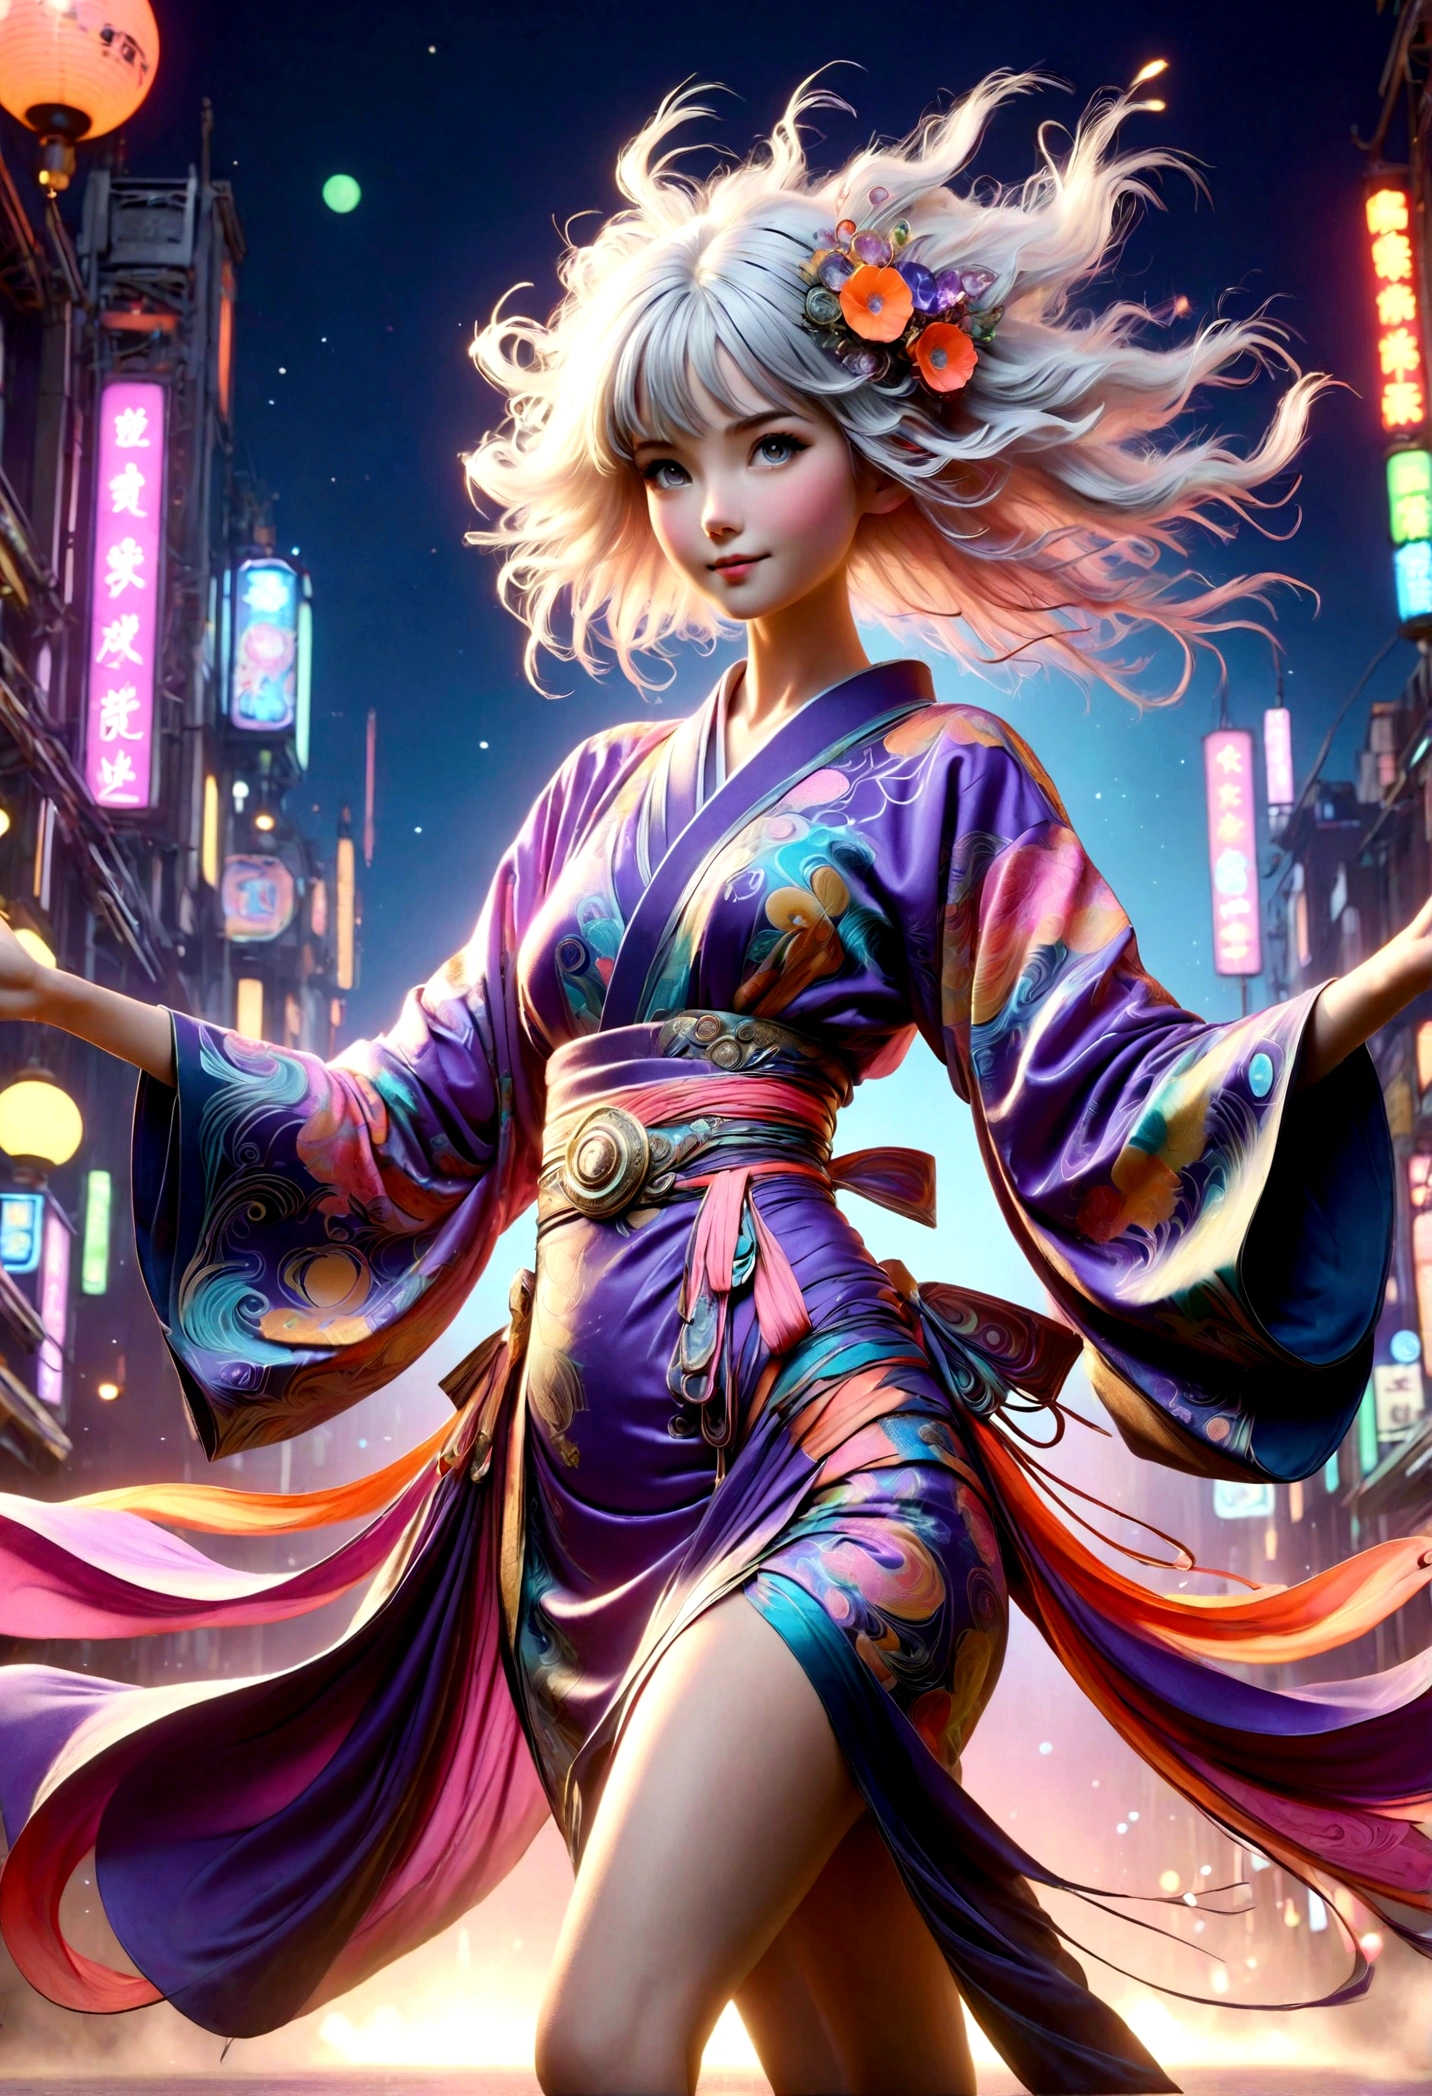 (Ultra-detailed face, looking away), (Fantasy Illustration with Gothic & Ukiyo-e & Comic Art), (The scene looks up at the runway from below:1.4), (Full Body, A young-aged woman with white hair, blunt bangs, Very long disheveled hair, lavender eyes), (She is jumping, singing, dancing, and walking down a fashion show runway in an avant-garde, futuristic neon-colored Japanese kimono, smiling and striking daring poses), (In the background, lights of various colors in an art nouveau style are flitting about)